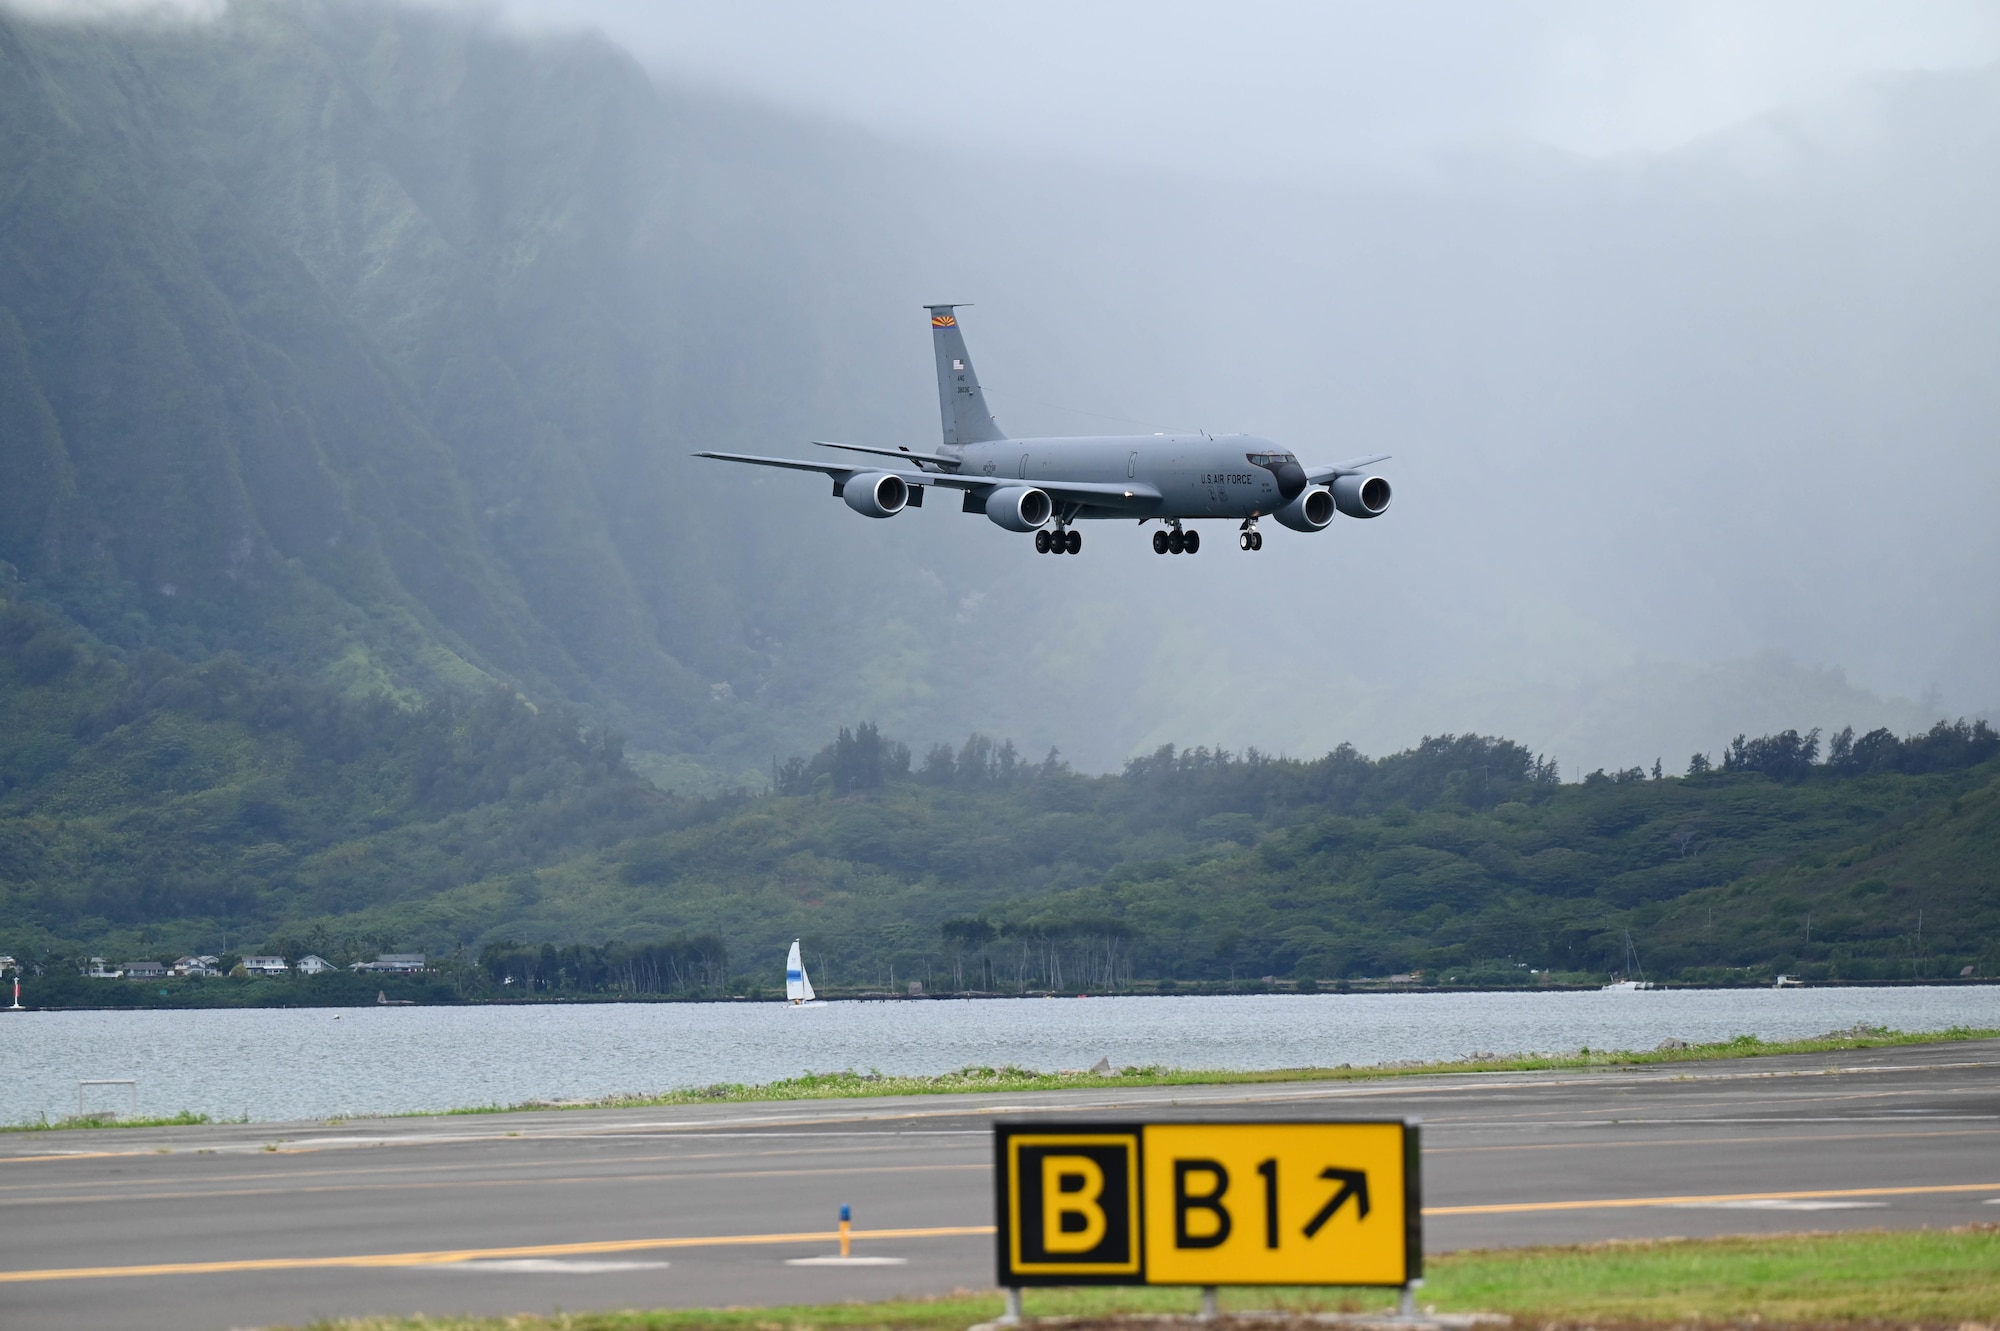 A KC-135 Stratotanker from the 161st Air Refueling Wing returns to Marine Corps Base Hawaii after completing an aerial refueling mission during an exercise Oct. 14, 2022. This multiday flyaway readiness exercise was the first of its kind performed by an Air National Guard air refueling wing focused on the Department of the Air Force’s priority of Agile Combat Employment.